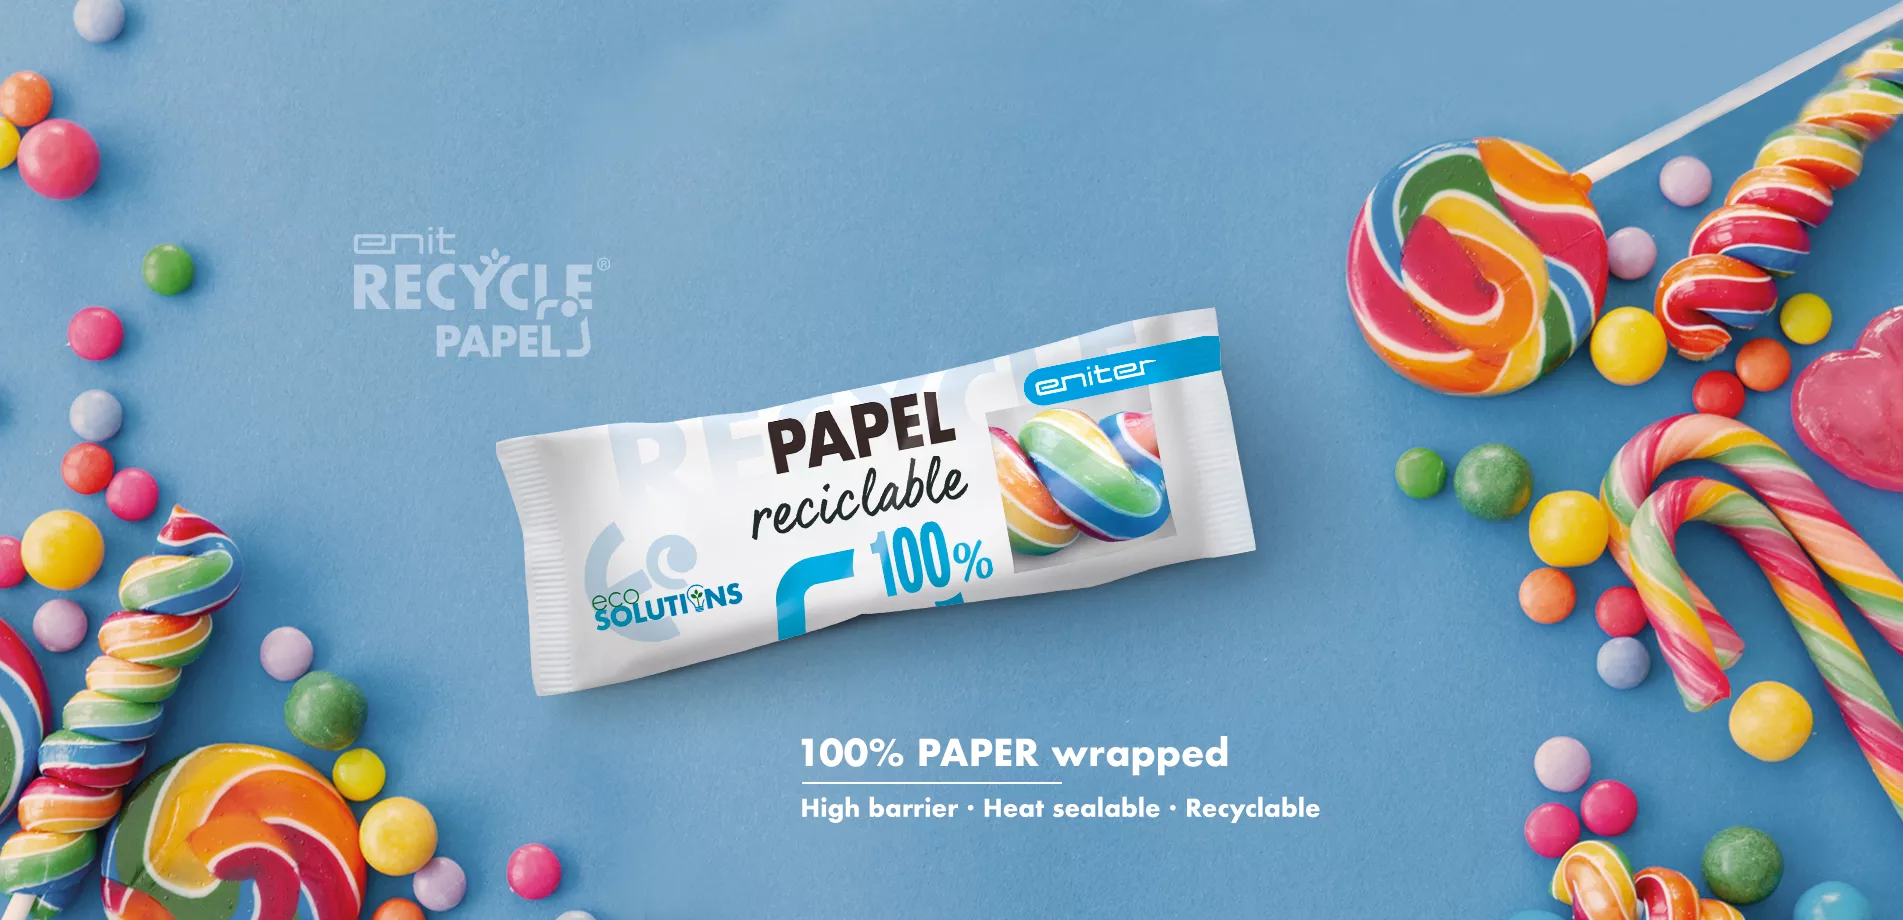 enitRECYCLE-PAPEL-home-1903x920px-Ingles